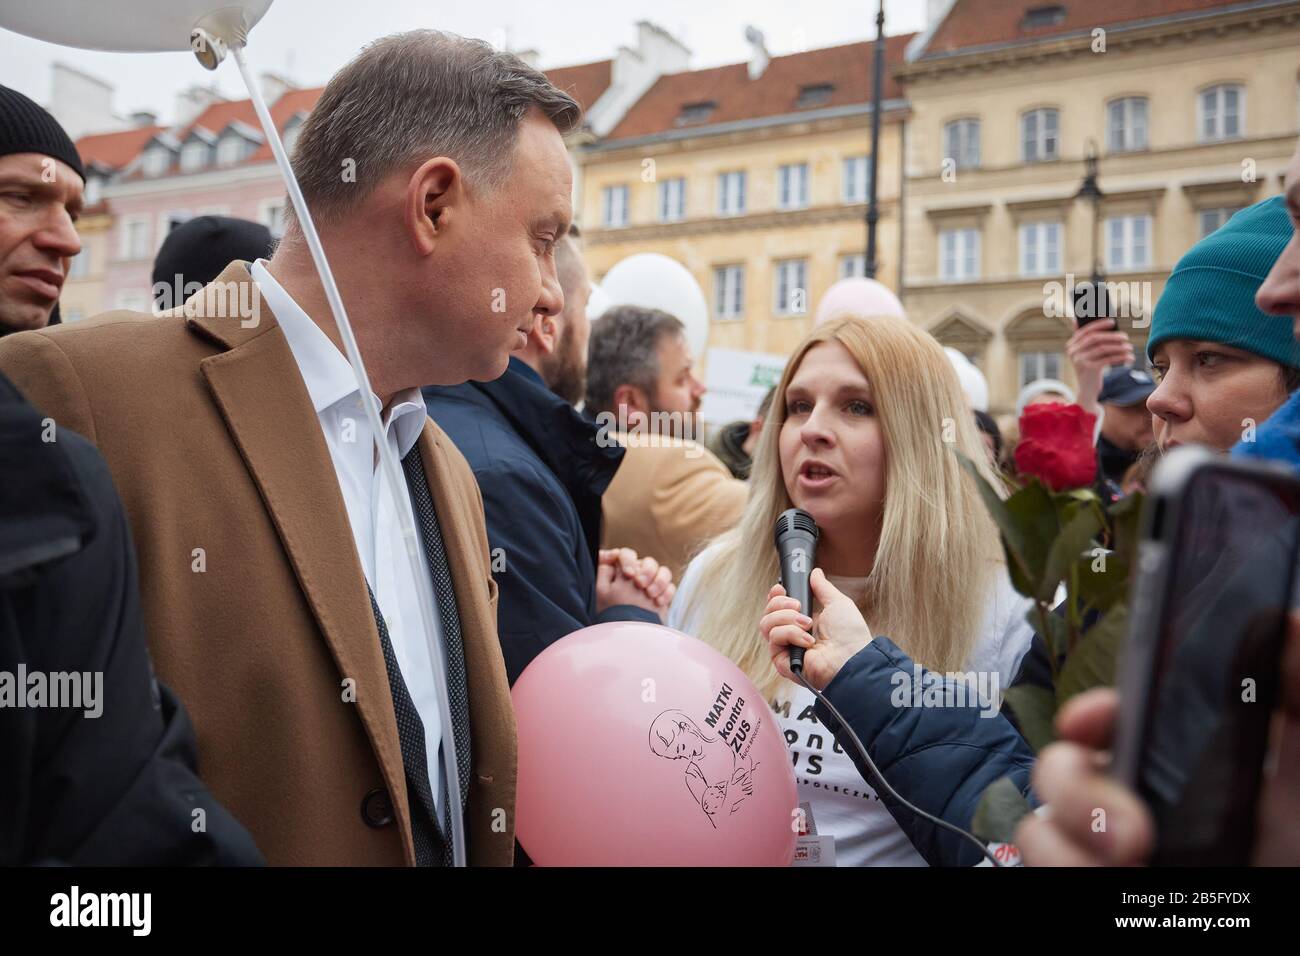 Warsaw, Mazovian, Poland. 8th Mar, 2020. A Walk Of The Presidential Couple During Which President ANDRZEJ DUDA Gave Flowers To Women He Met And Made Wishes On The Occasion Of Women's Day.in the picture: ANDRZEJ DUDA Credit: Hubert Mathis/ZUMA Wire/Alamy Live News Stock Photo